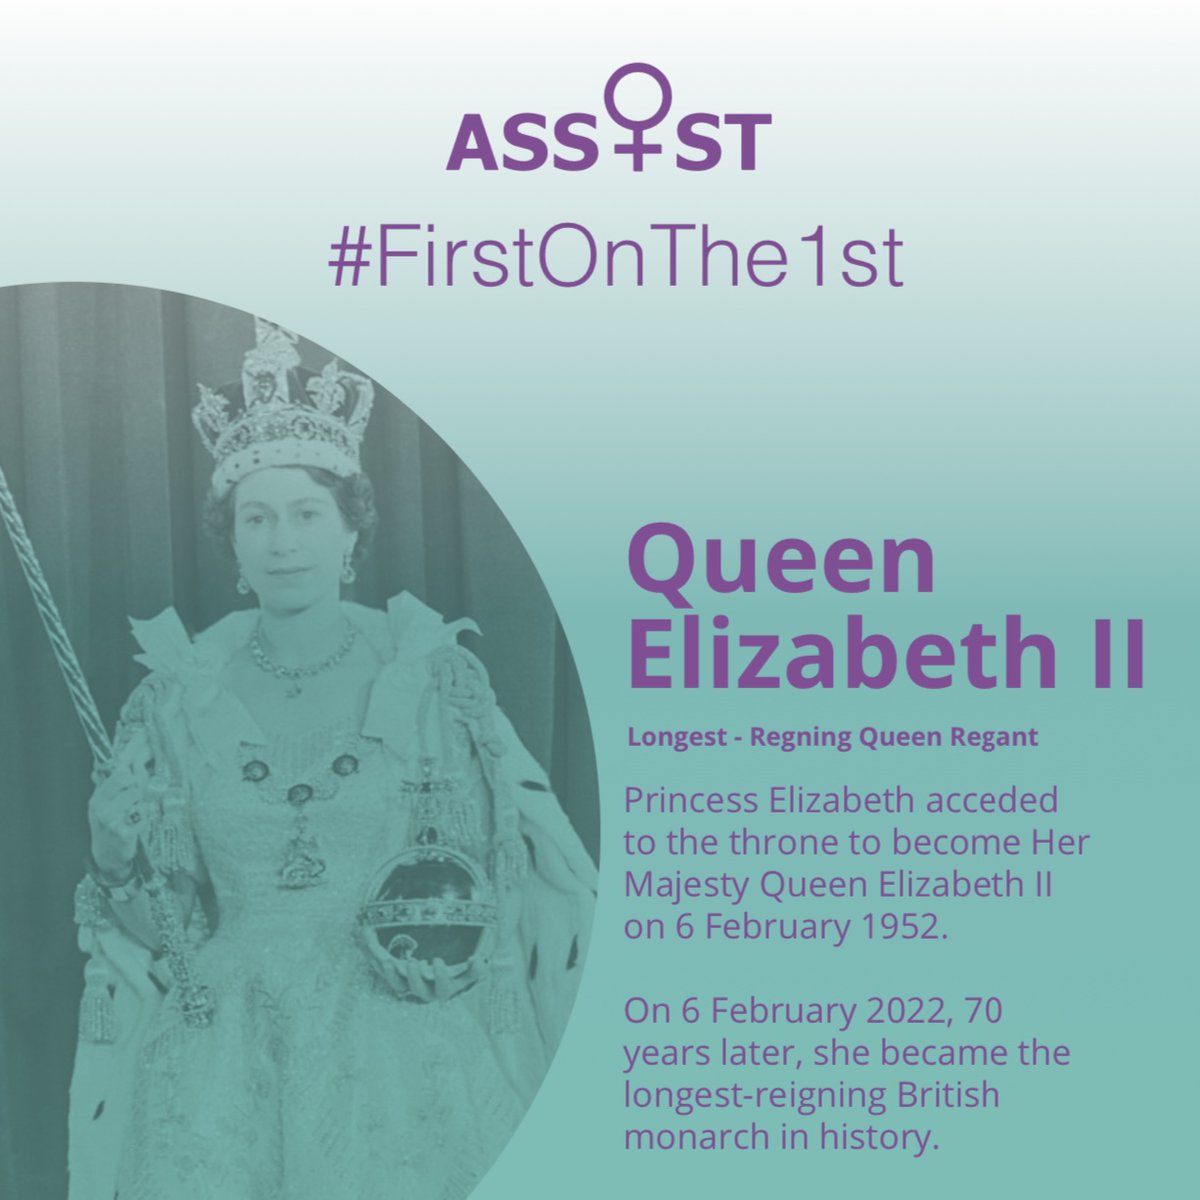 👑In September's #FirstOnThe1st, we honour the late Queen Elizabeth II, the longest-reigning British monarch in history. Her remarkable reign and legacy of service and leadership inspires us all. 🇬🇧👸 #QueenElizabethII #BritishRoyalty #Legacy